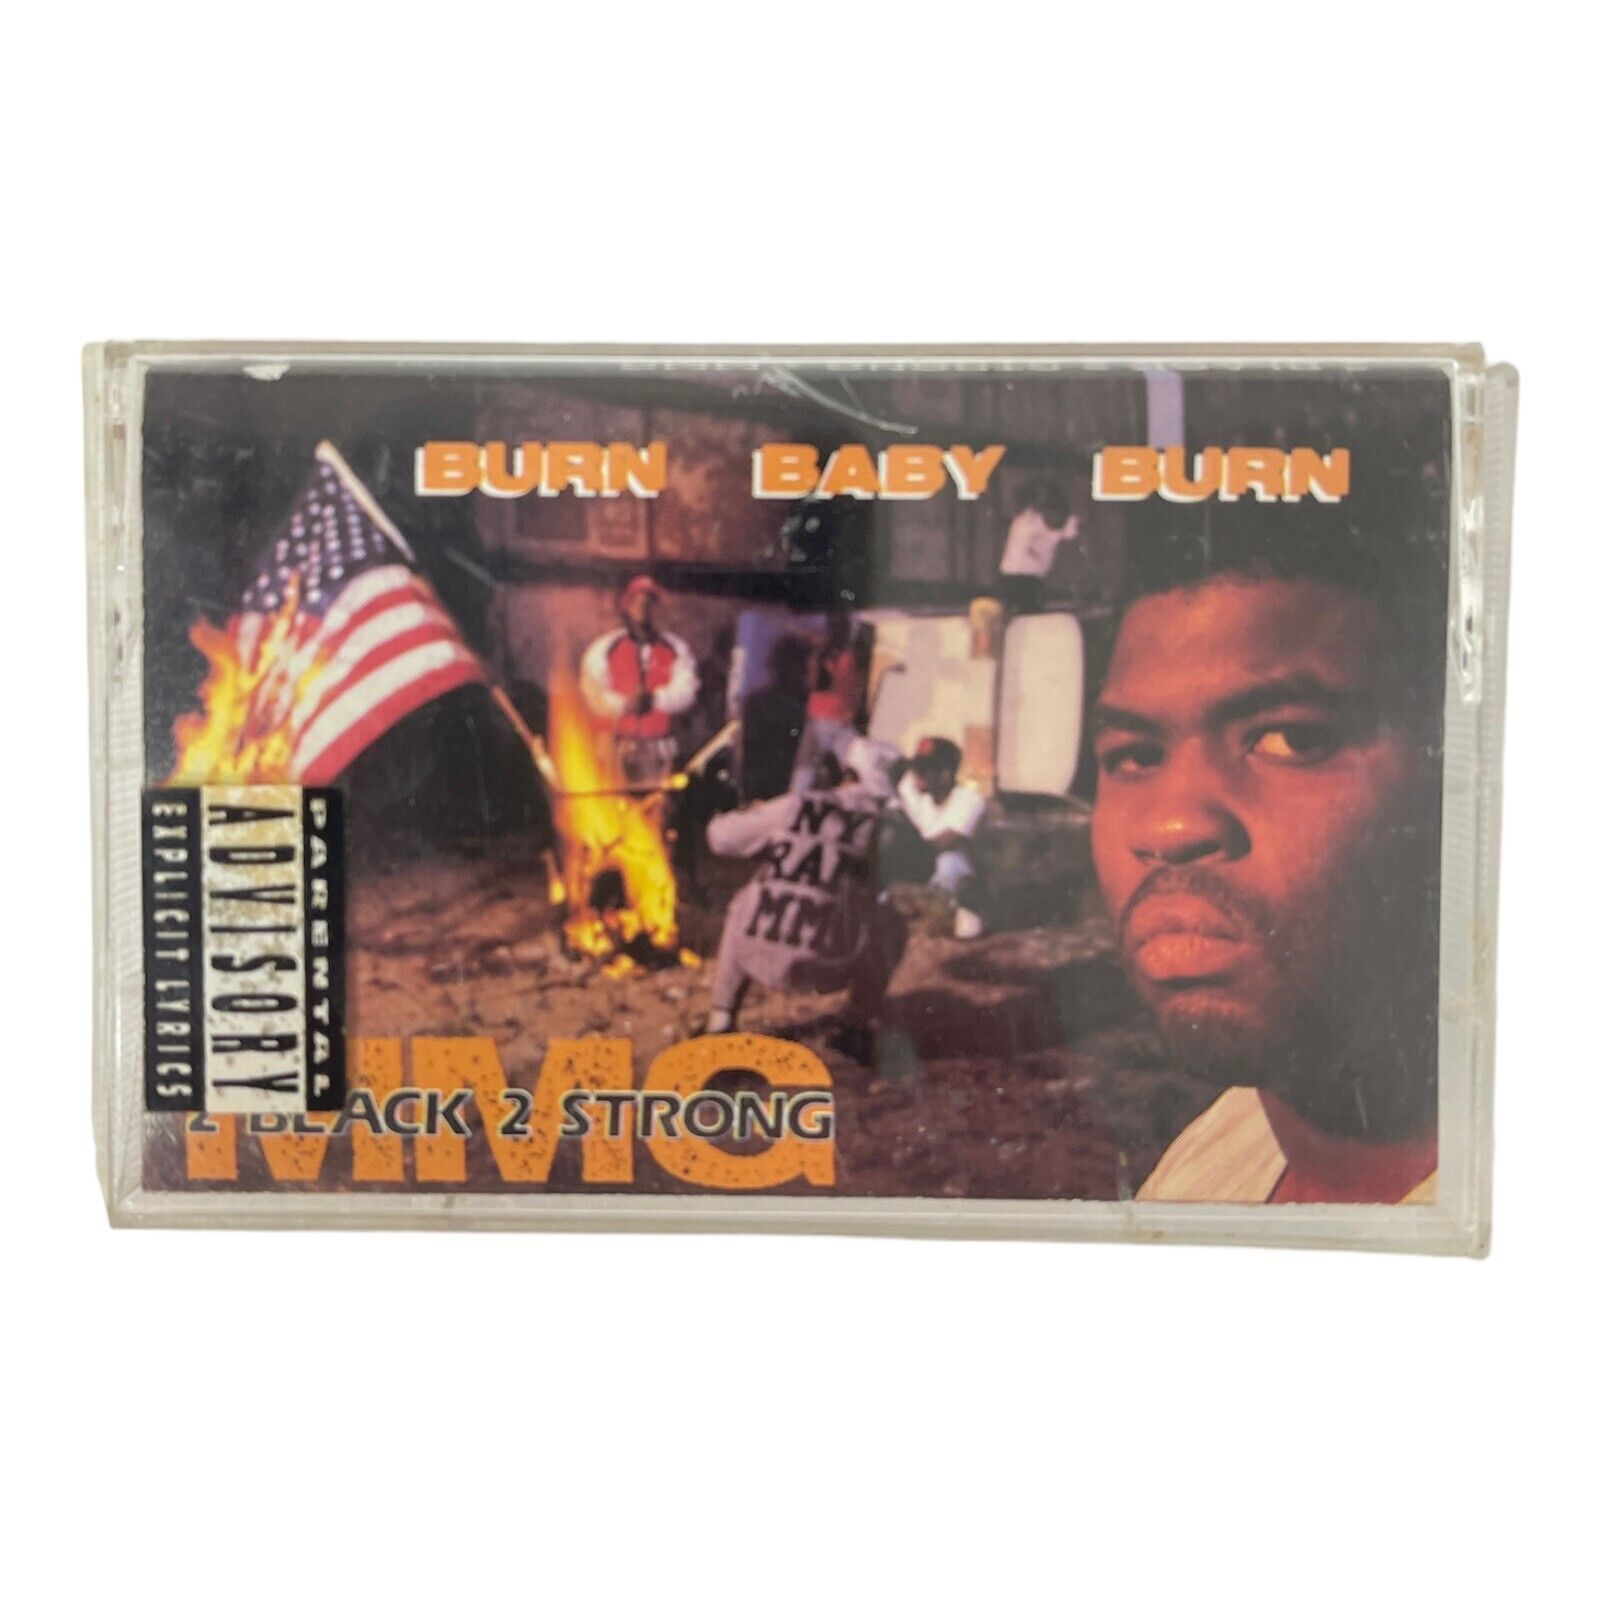 2 Black 2 Strong MMG – Burn Baby Burn Cassette Tape 1990 Clappers Records